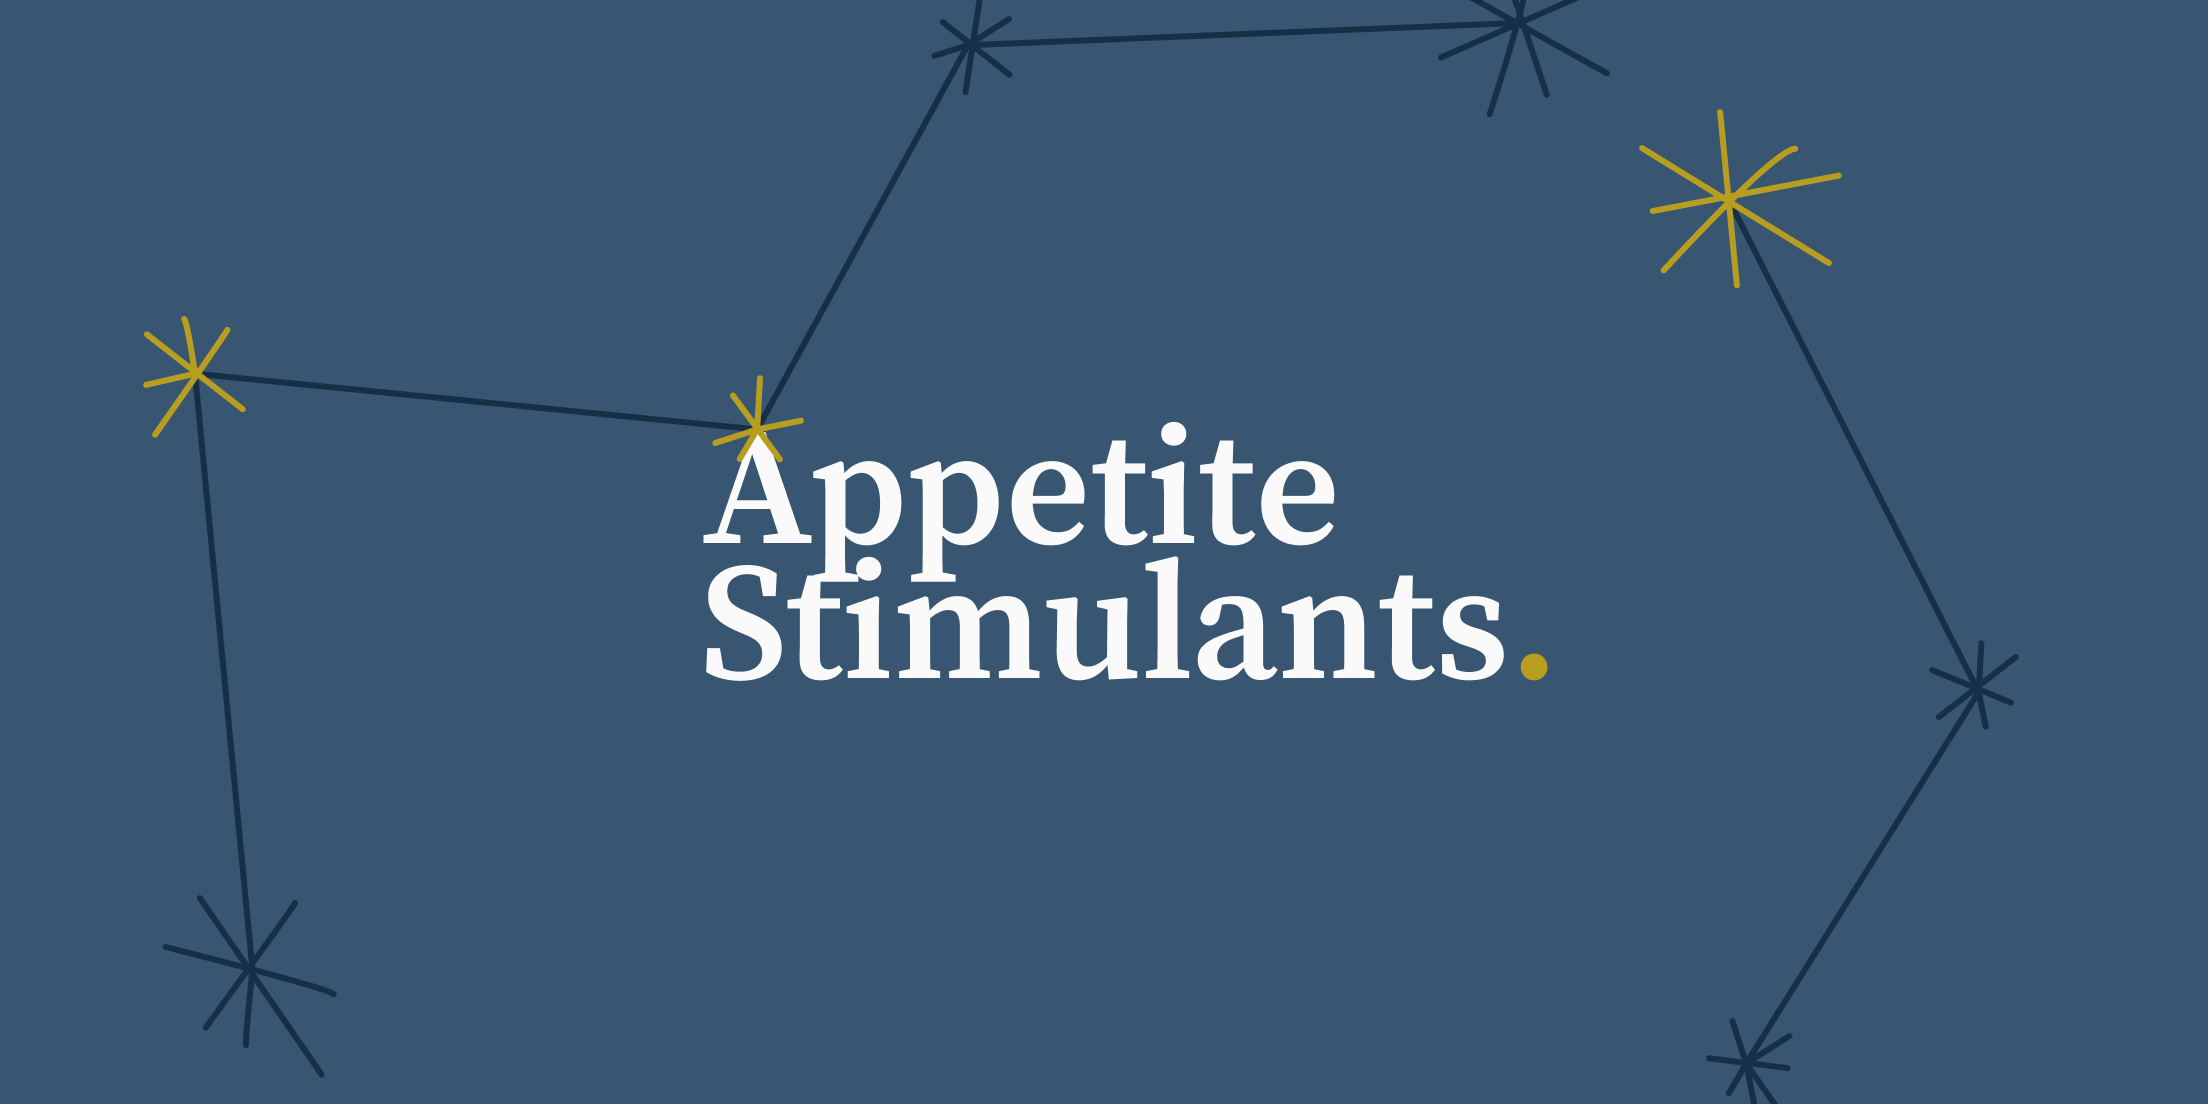 Should You Use Appetite Stimulants for Your Autistic Child?